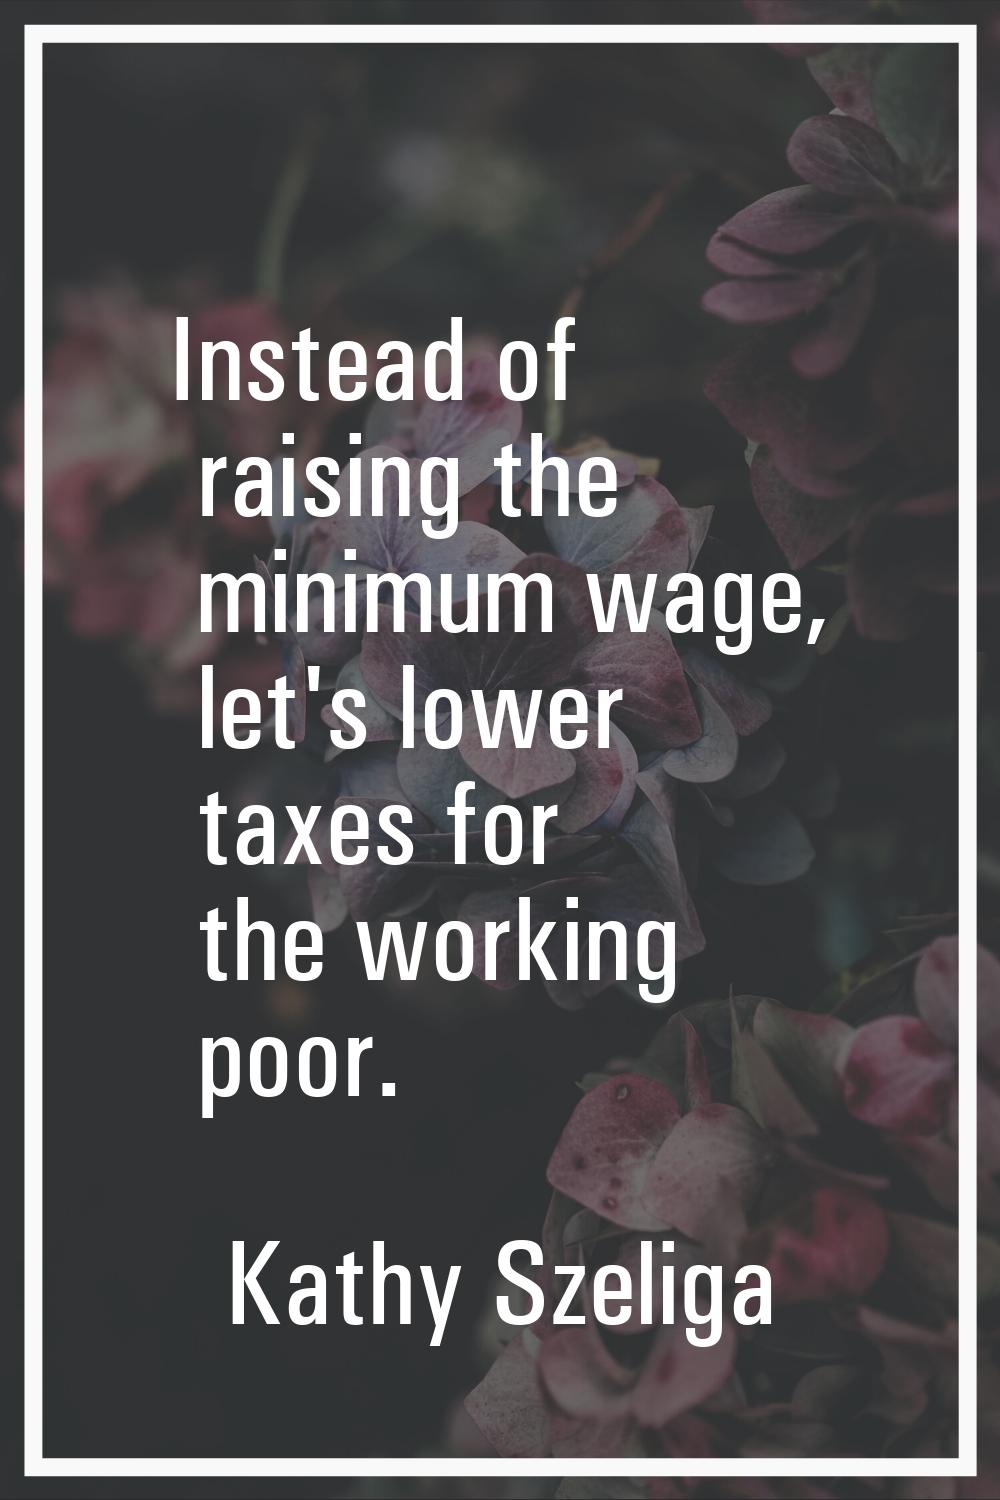 Instead of raising the minimum wage, let's lower taxes for the working poor.